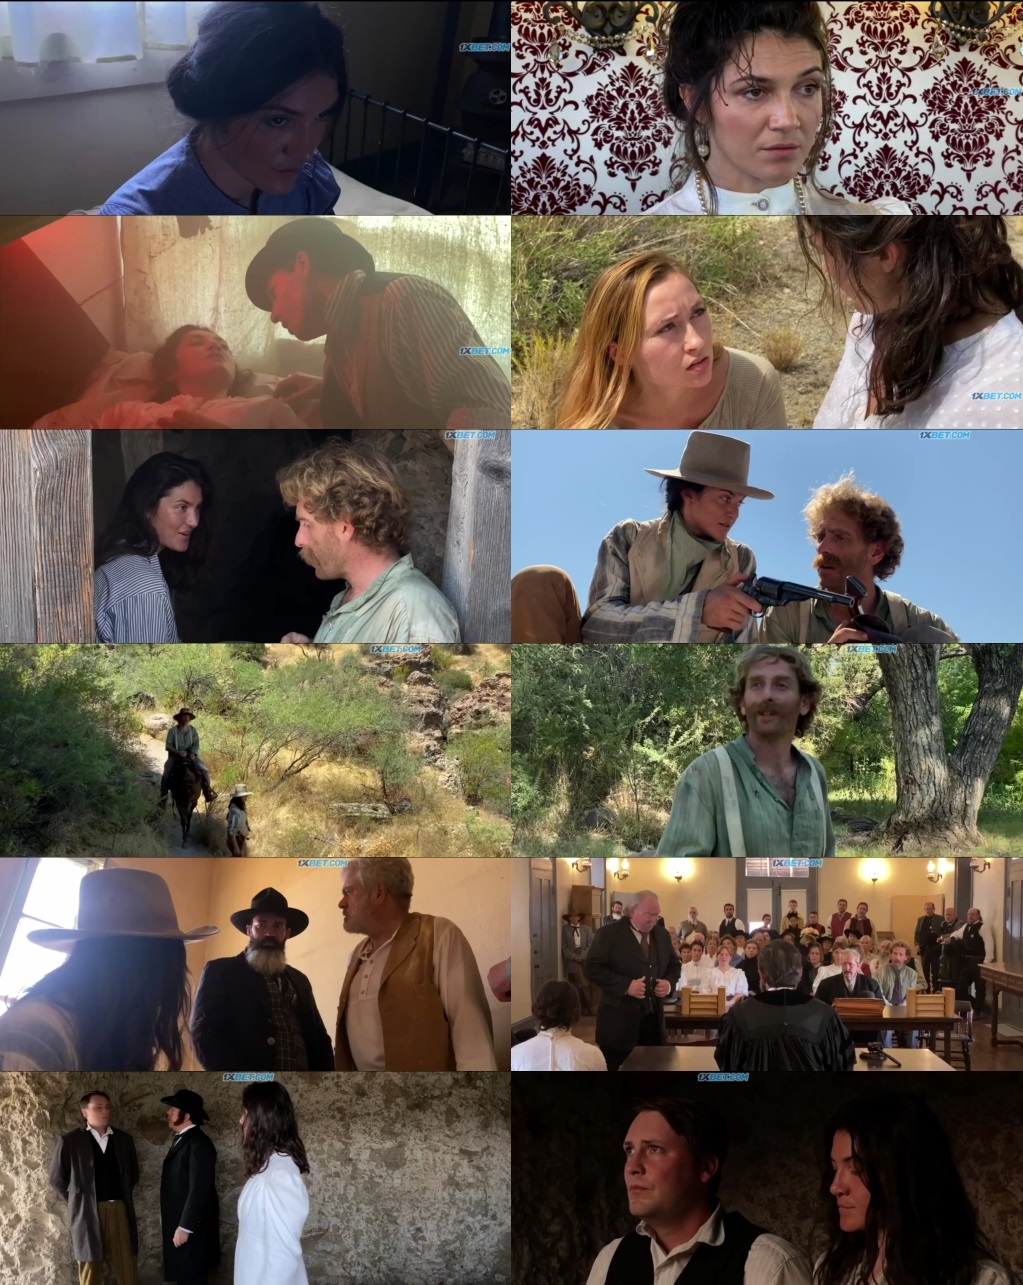 Download The Woman Who Robbed the Stagecoach Movie dual audio scene 1